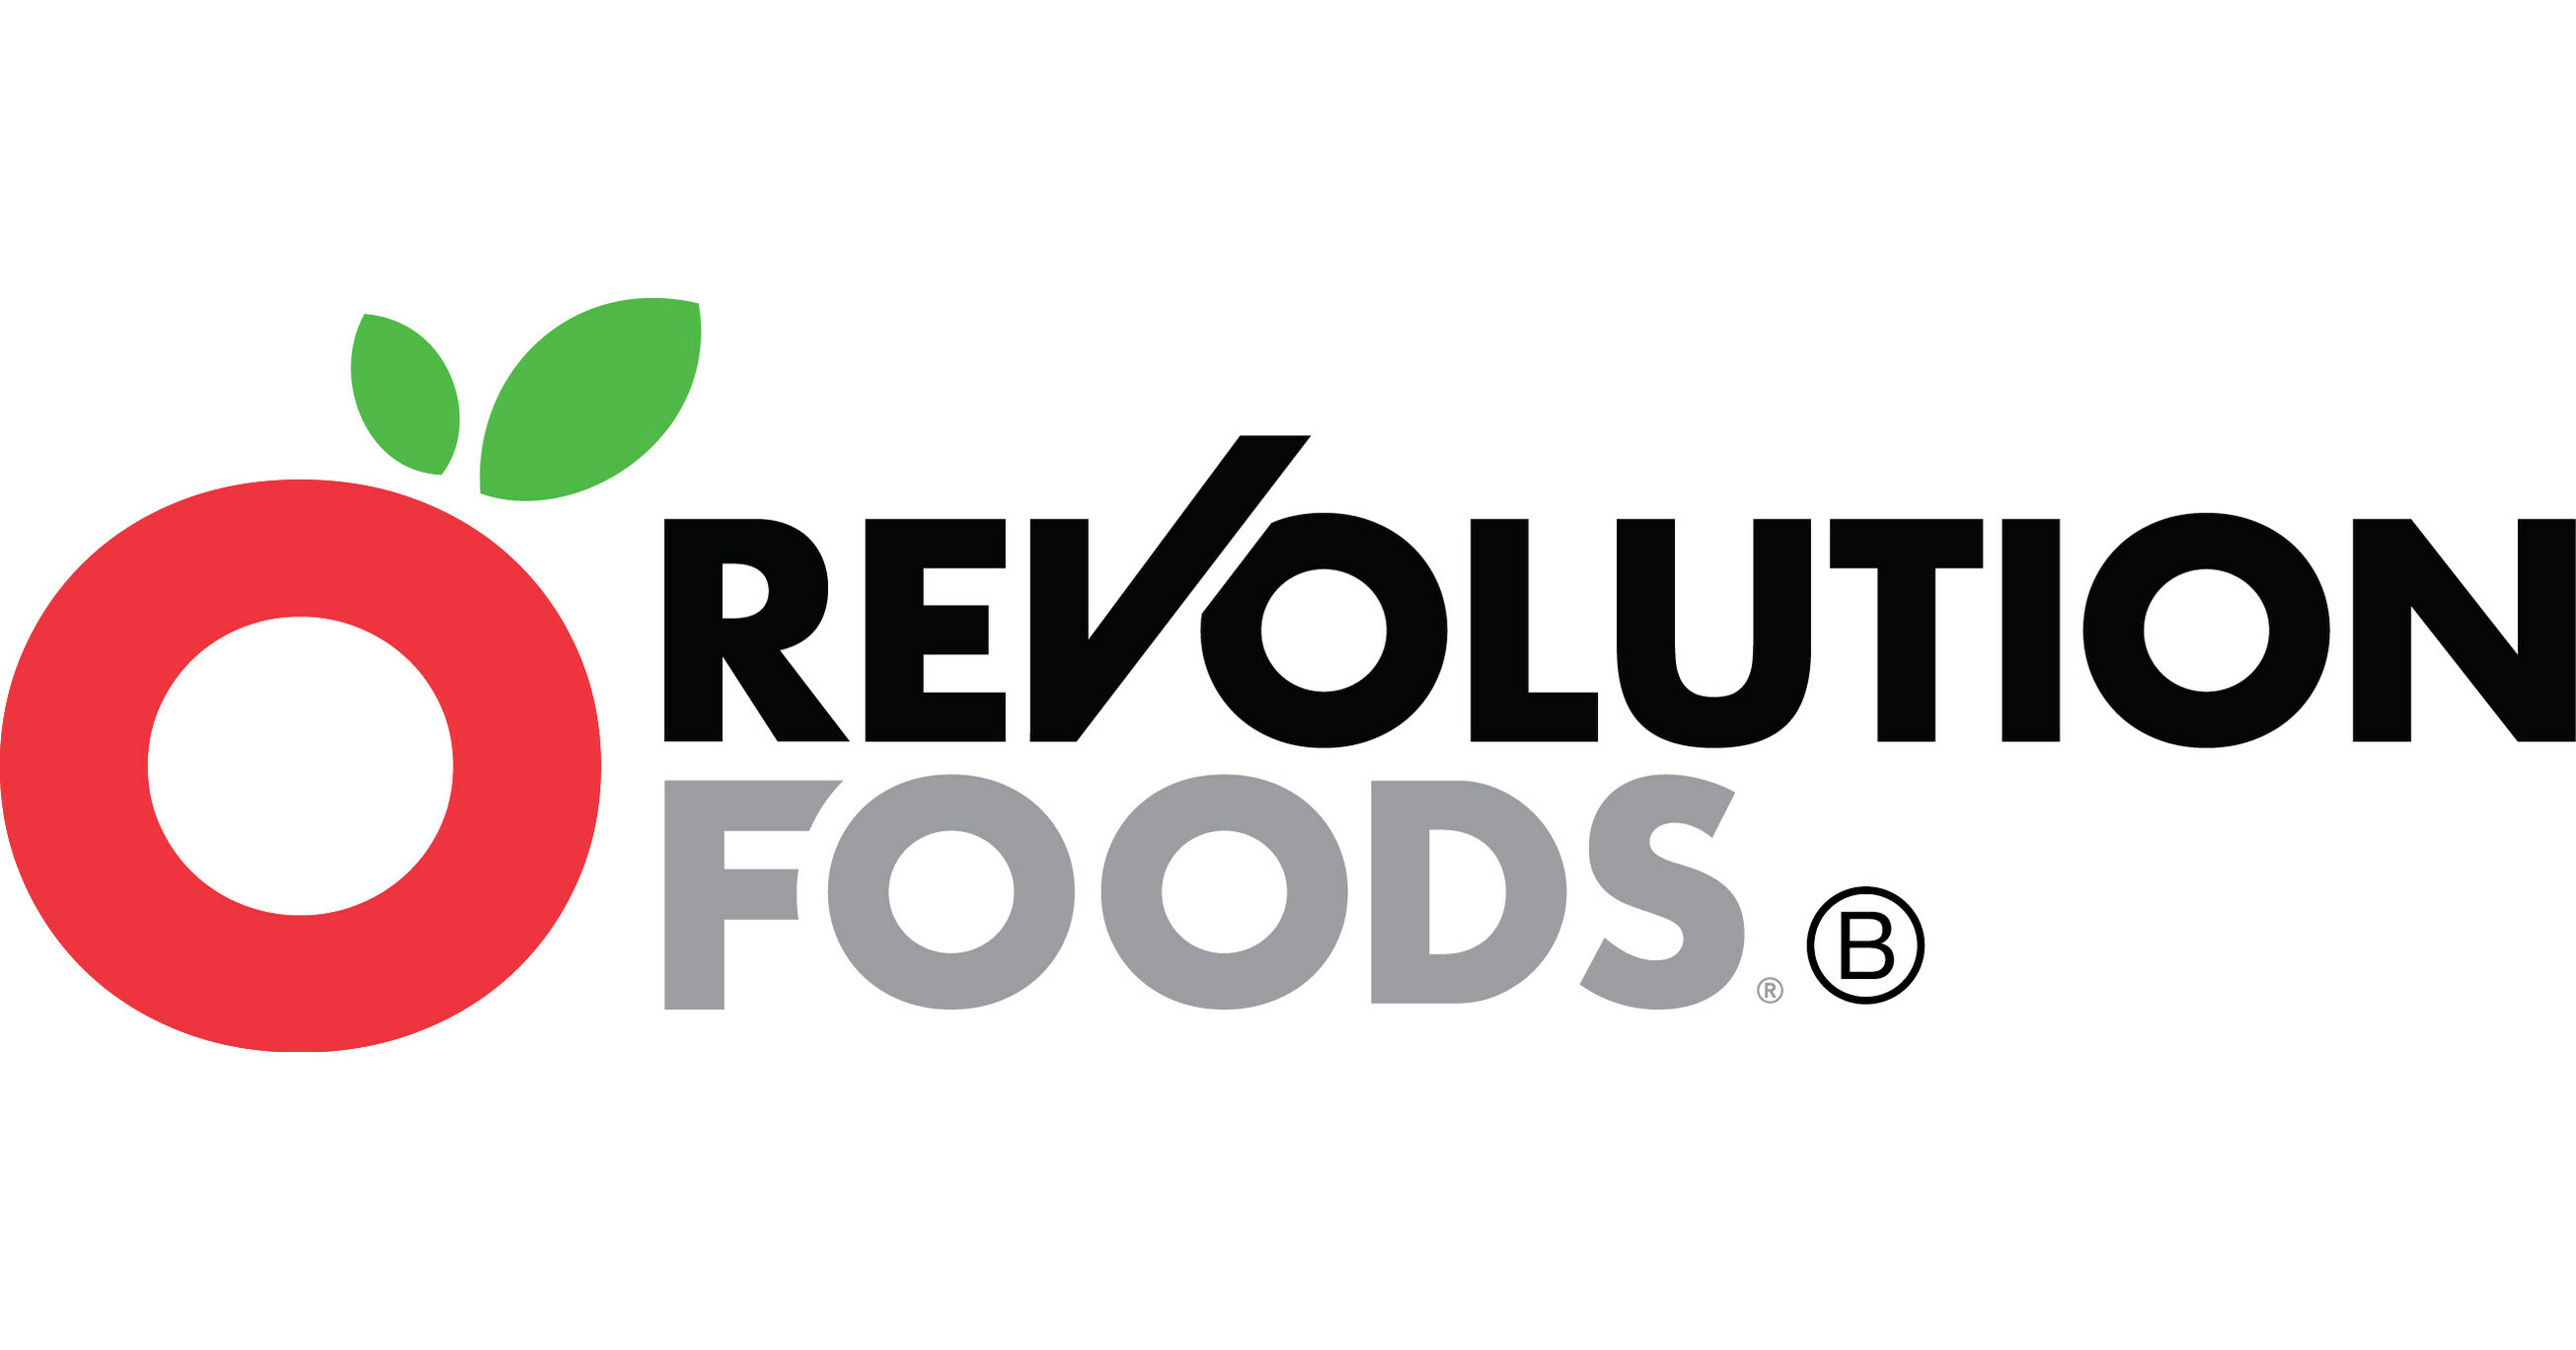 Revolution Foods Increases Focus on Serving Local Students and Communities